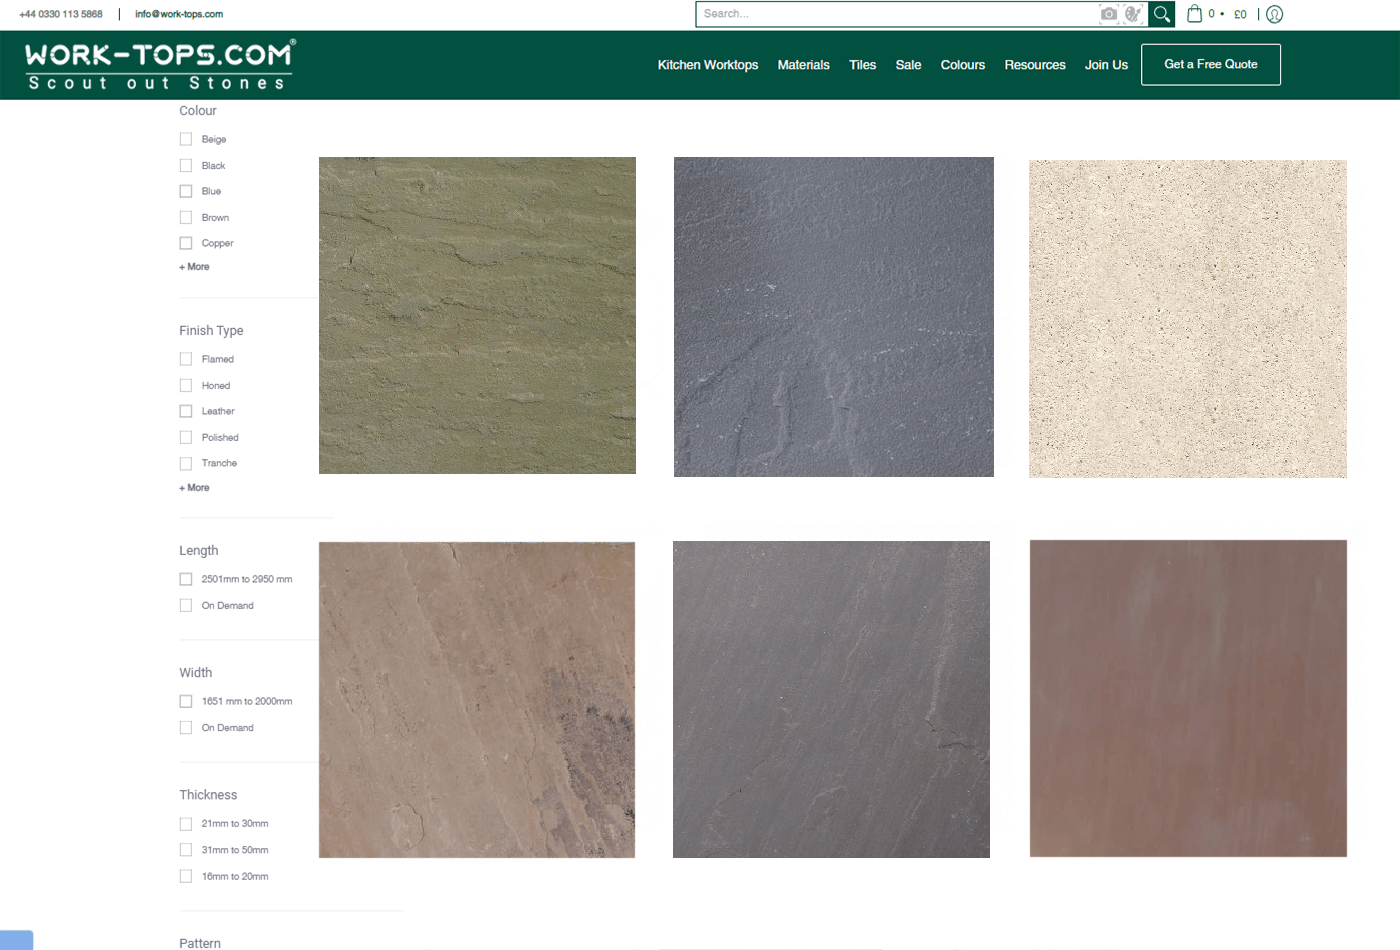 Look At These Other Solid Colour Flooring Stones Too